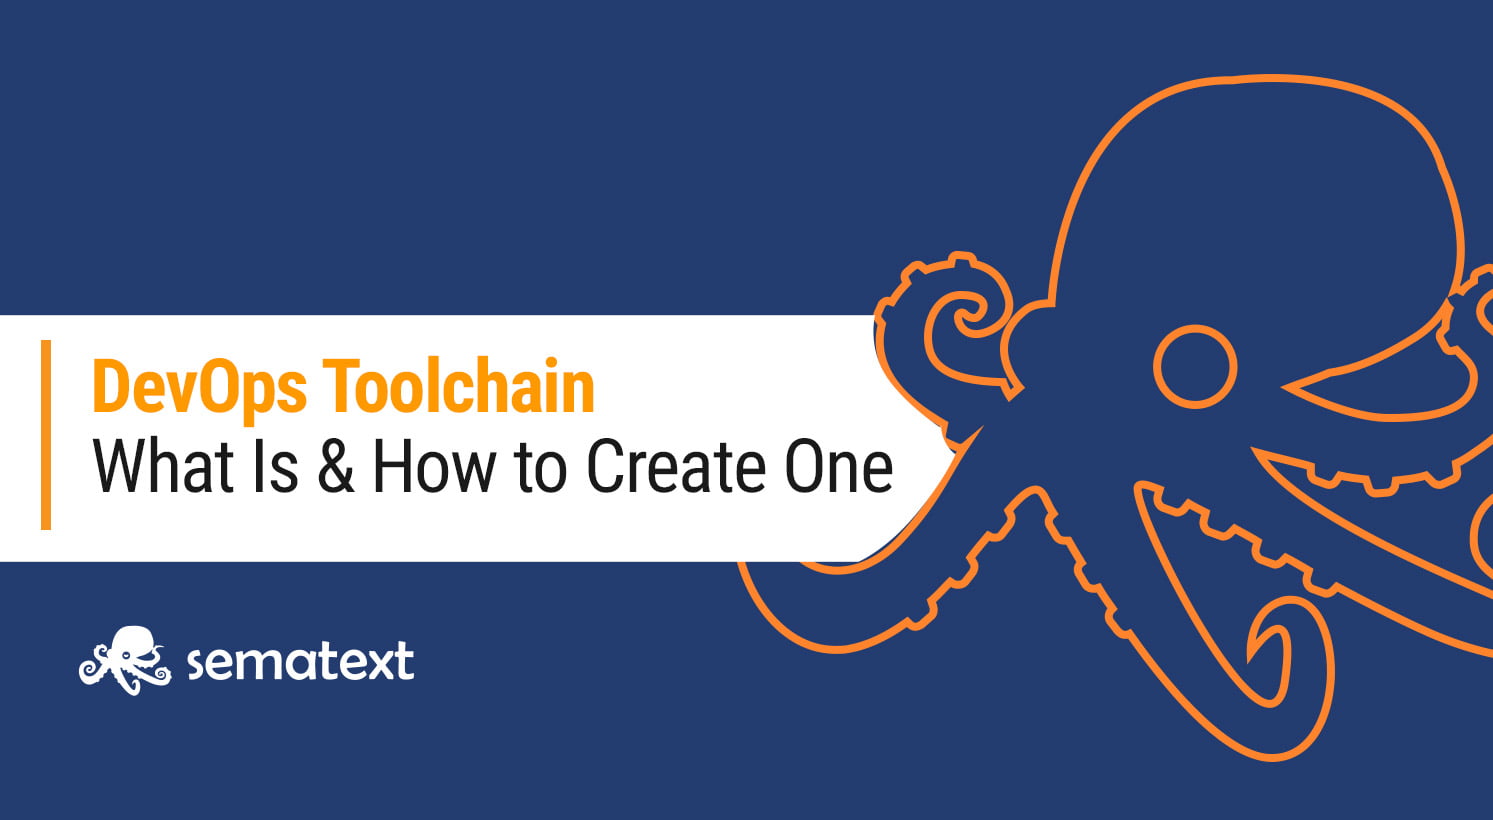 DevOps Toolchain Explained: What Is & How to Create One. Choosing Between Buying or Building Your Own Tools